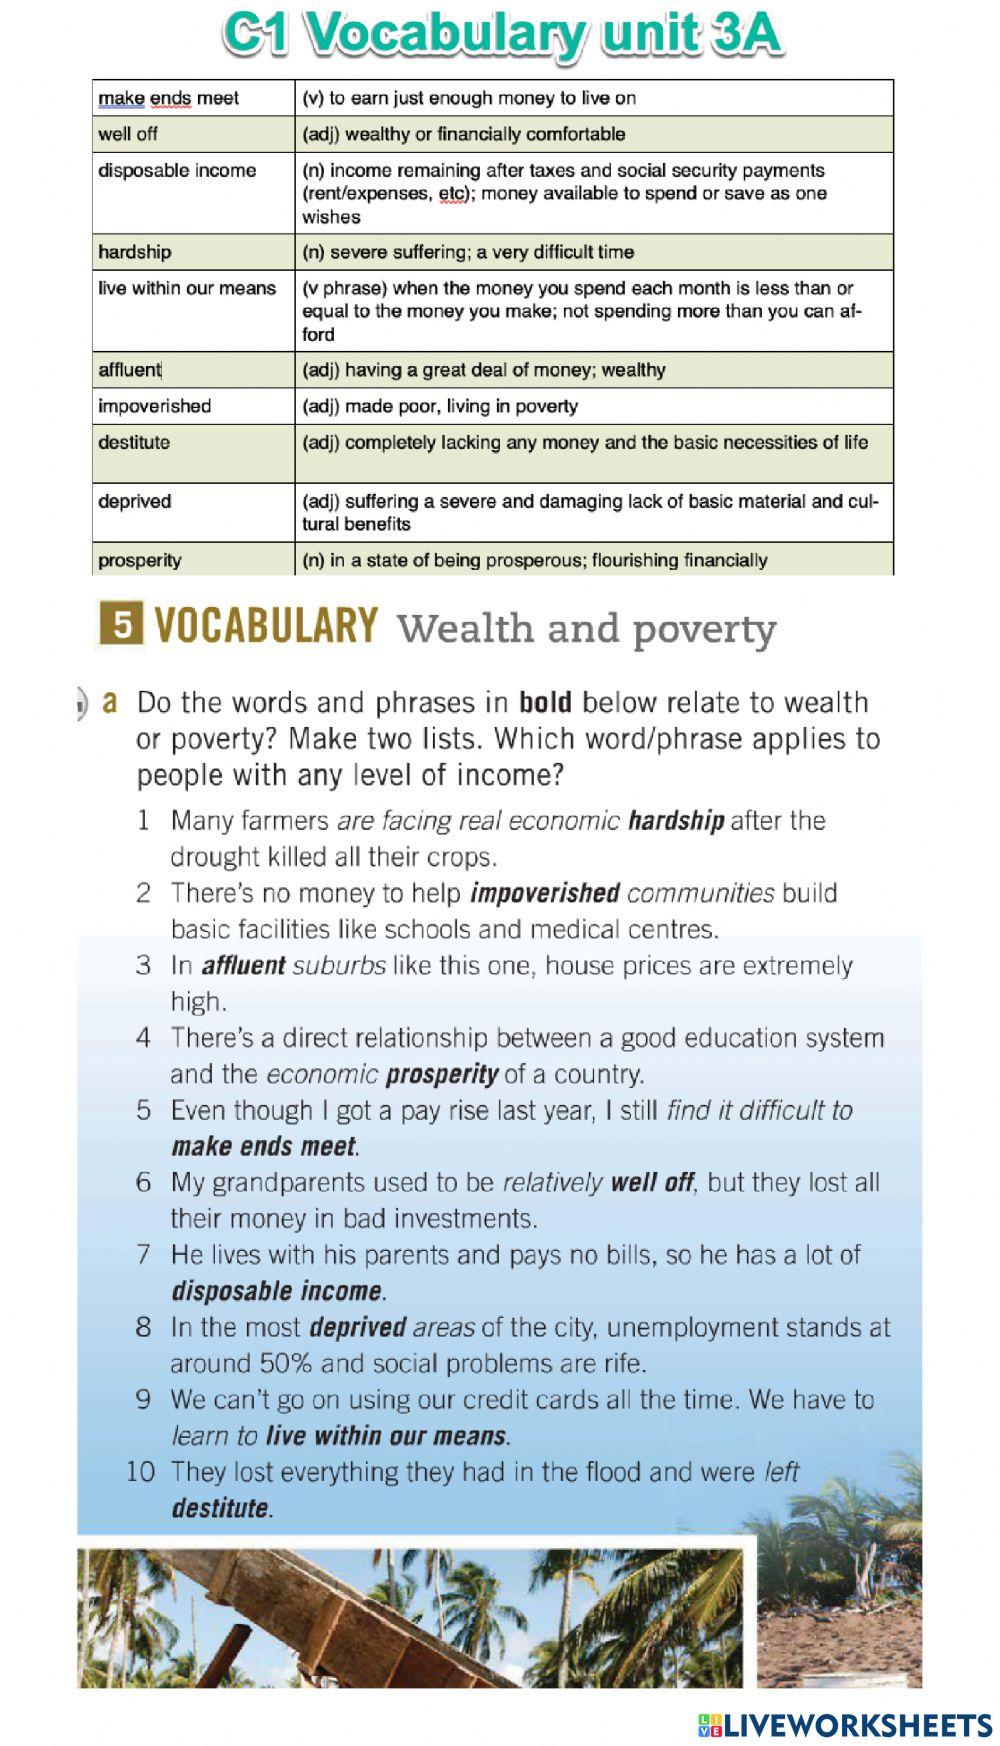 Wealth and poverty vocabulary C1